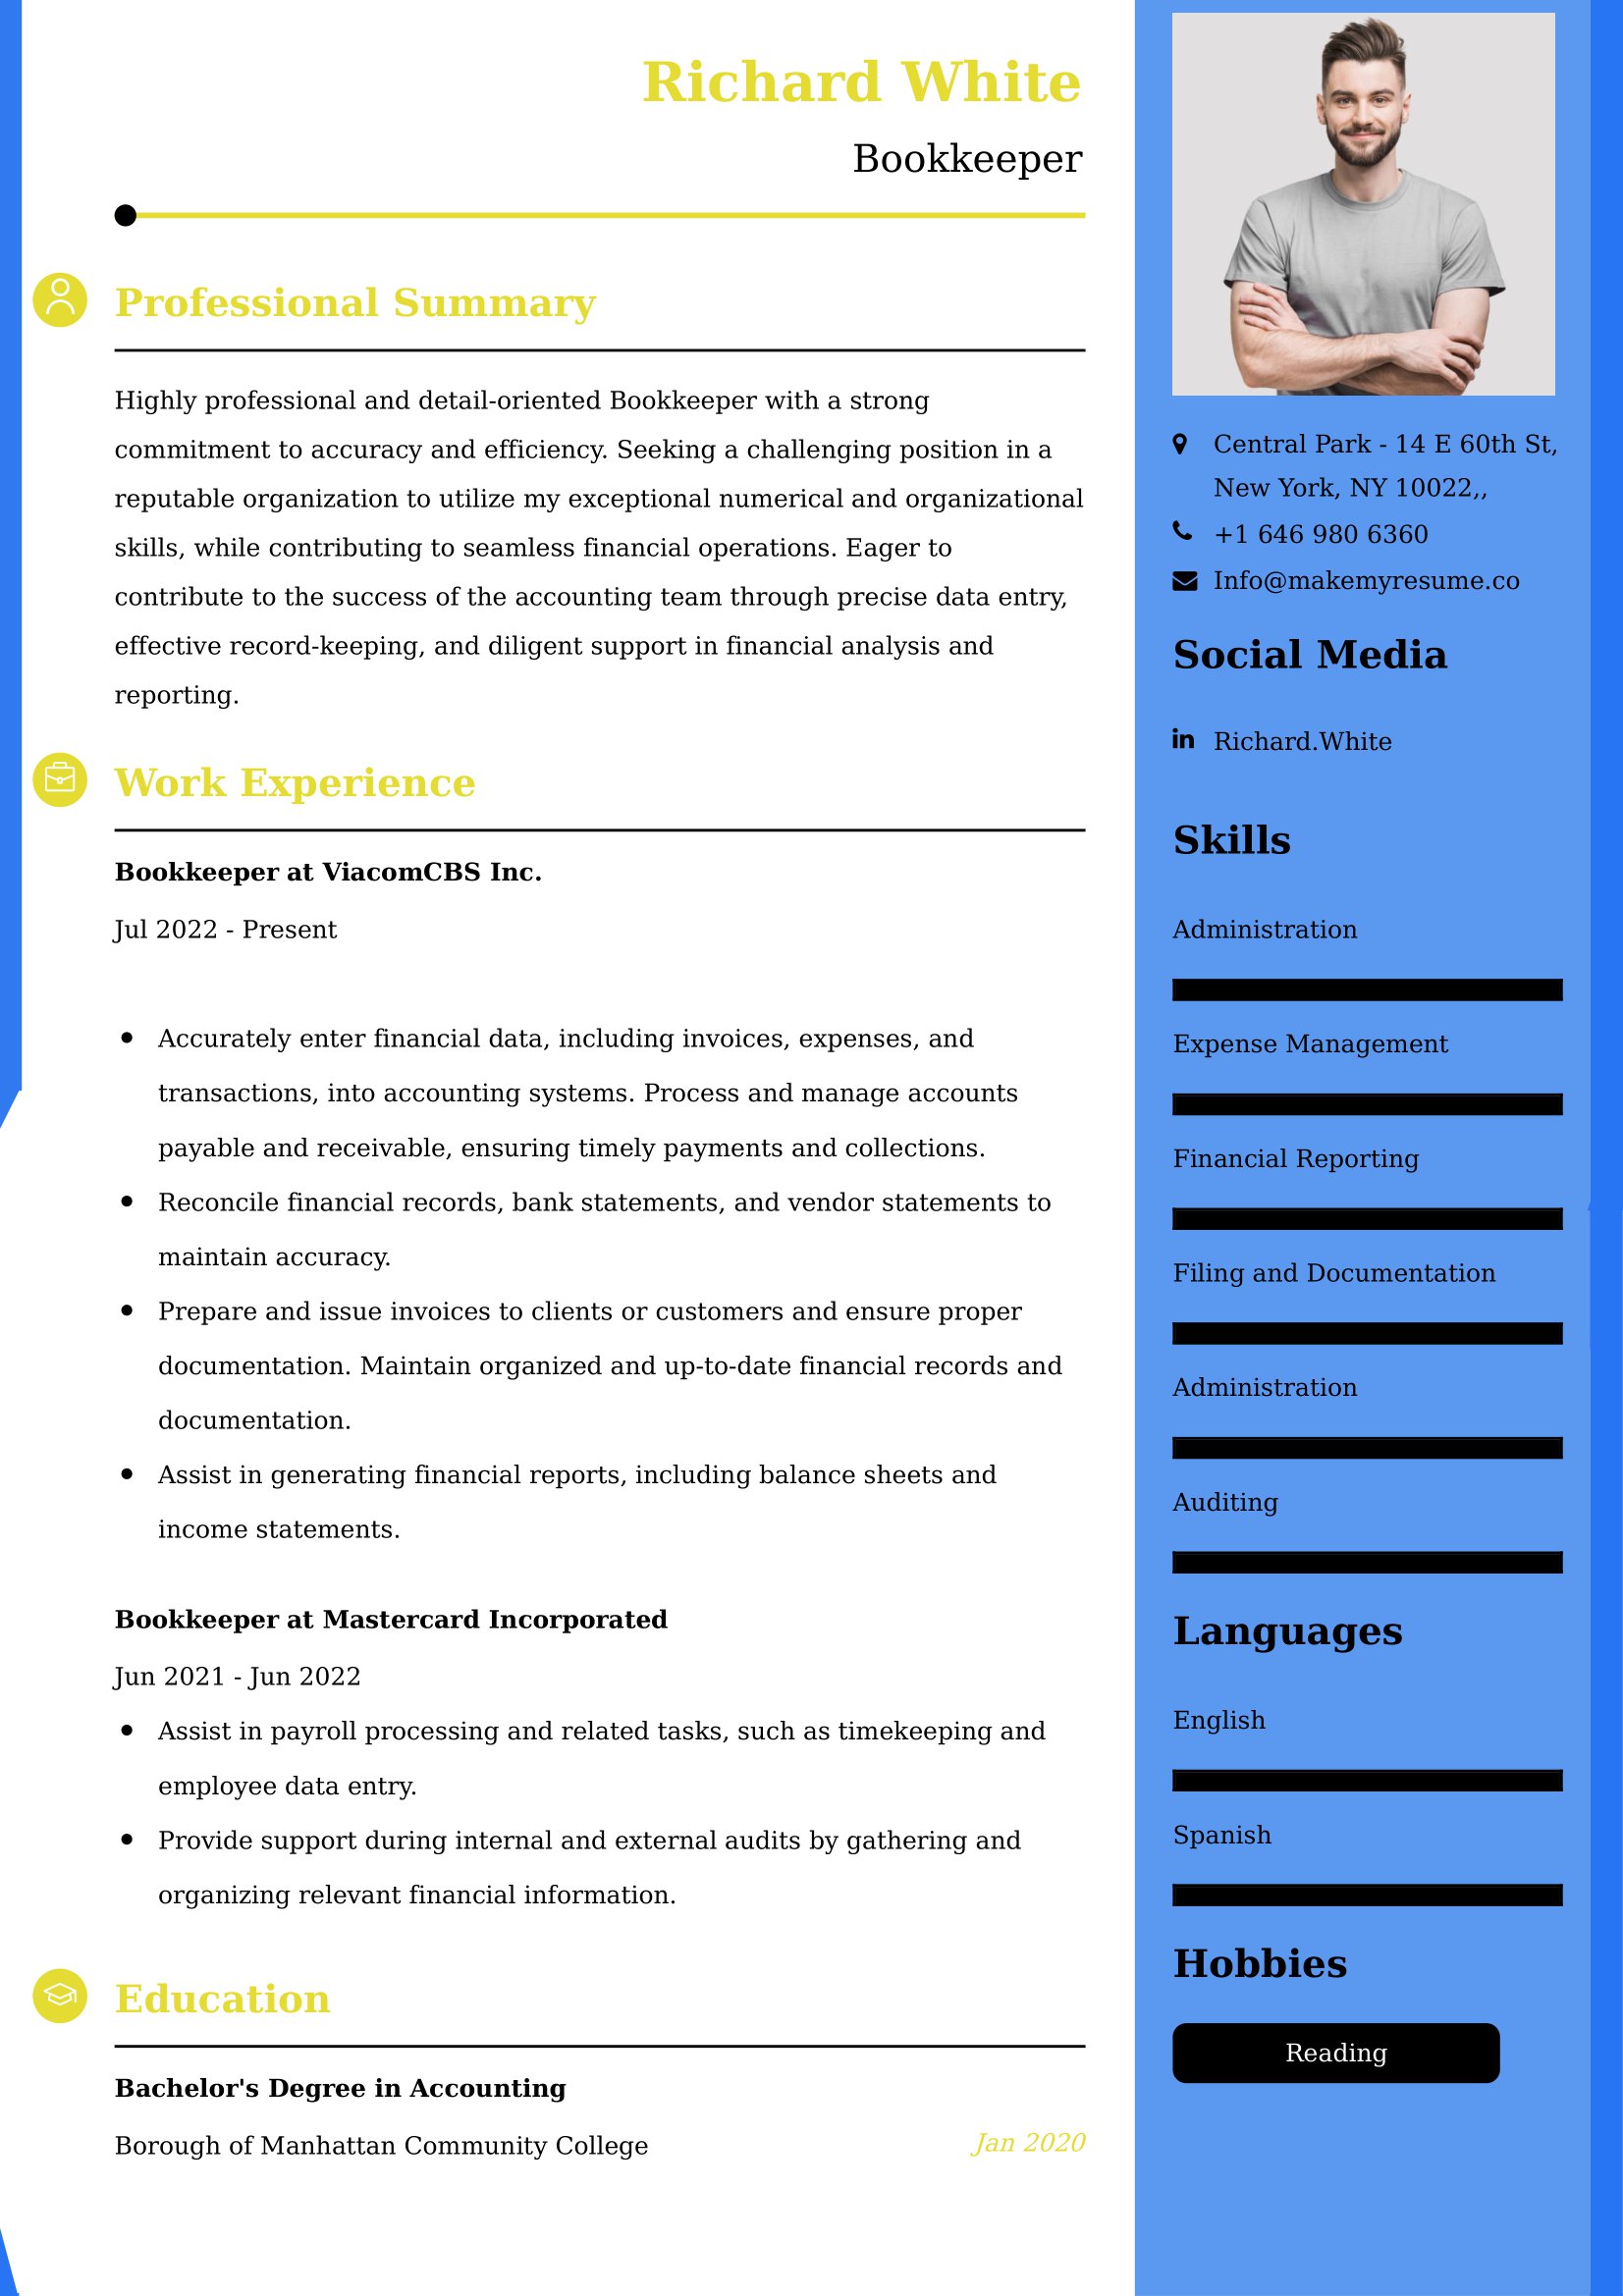 75+ Professional Billing and Collections Resume Examples, Latest Format